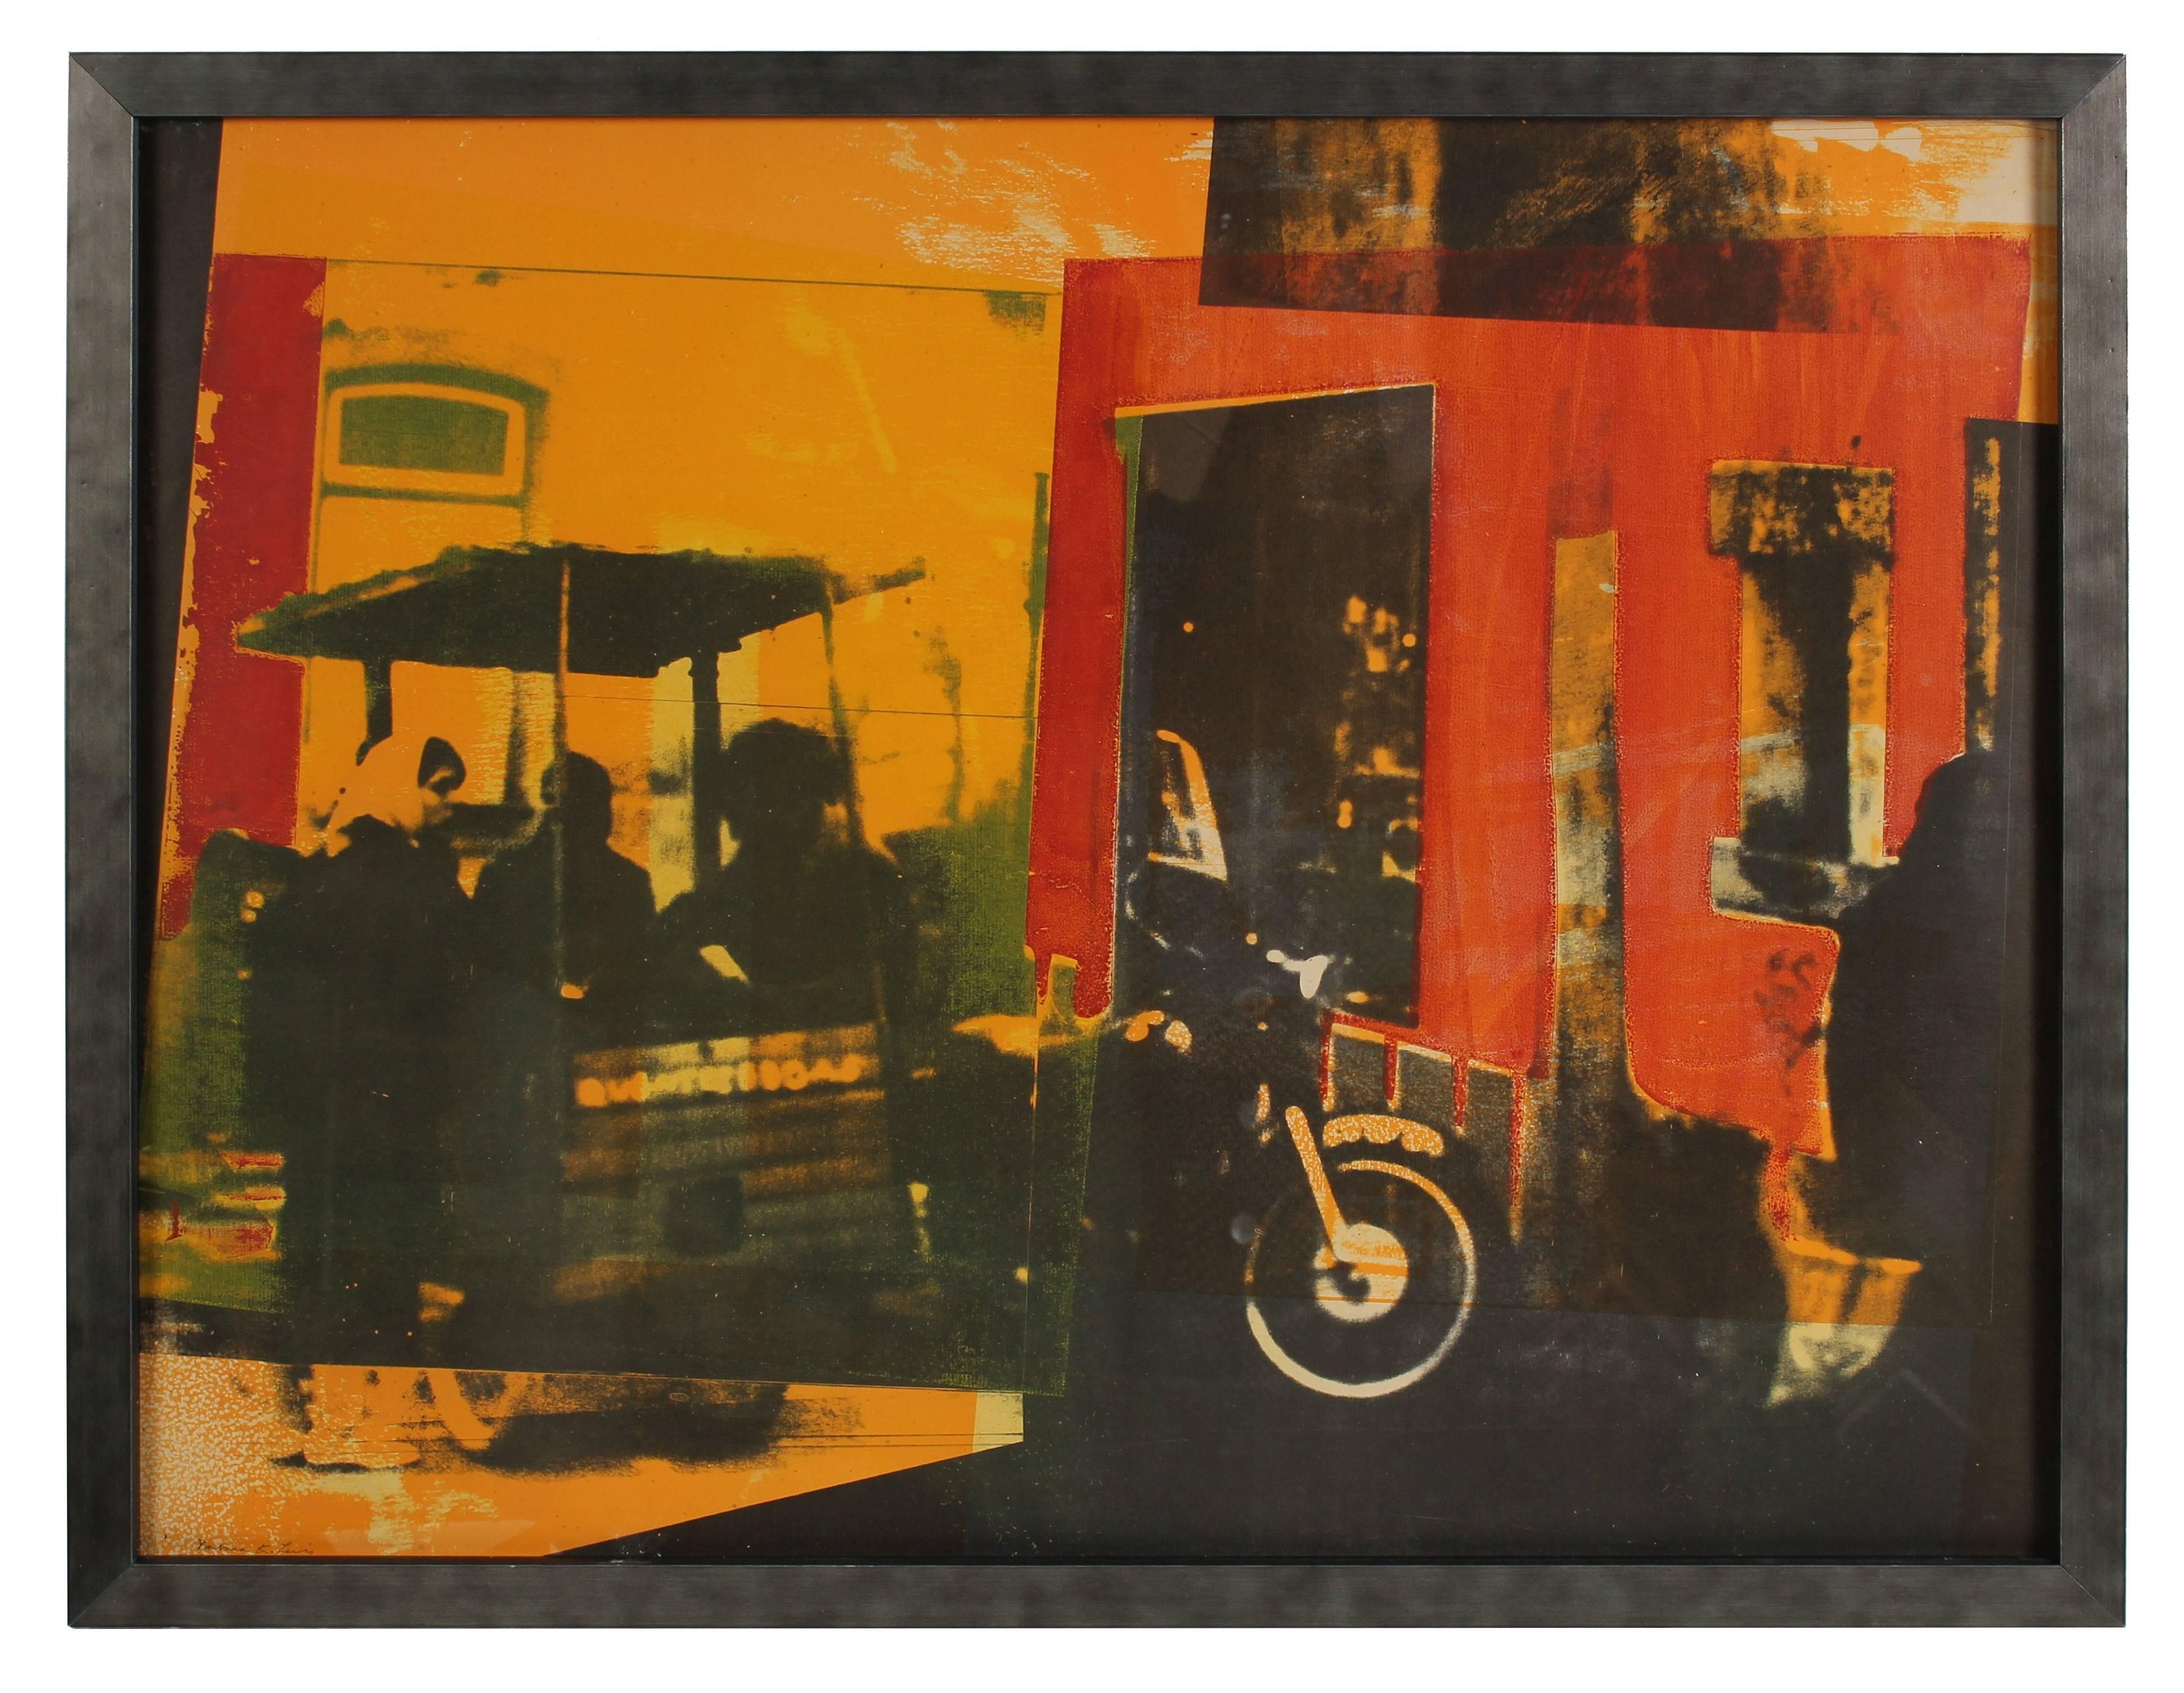 Barbara Lewis Abstract Print - "Chestnut Vendor" Cityscape Lithograph in Warm Colors, 1972